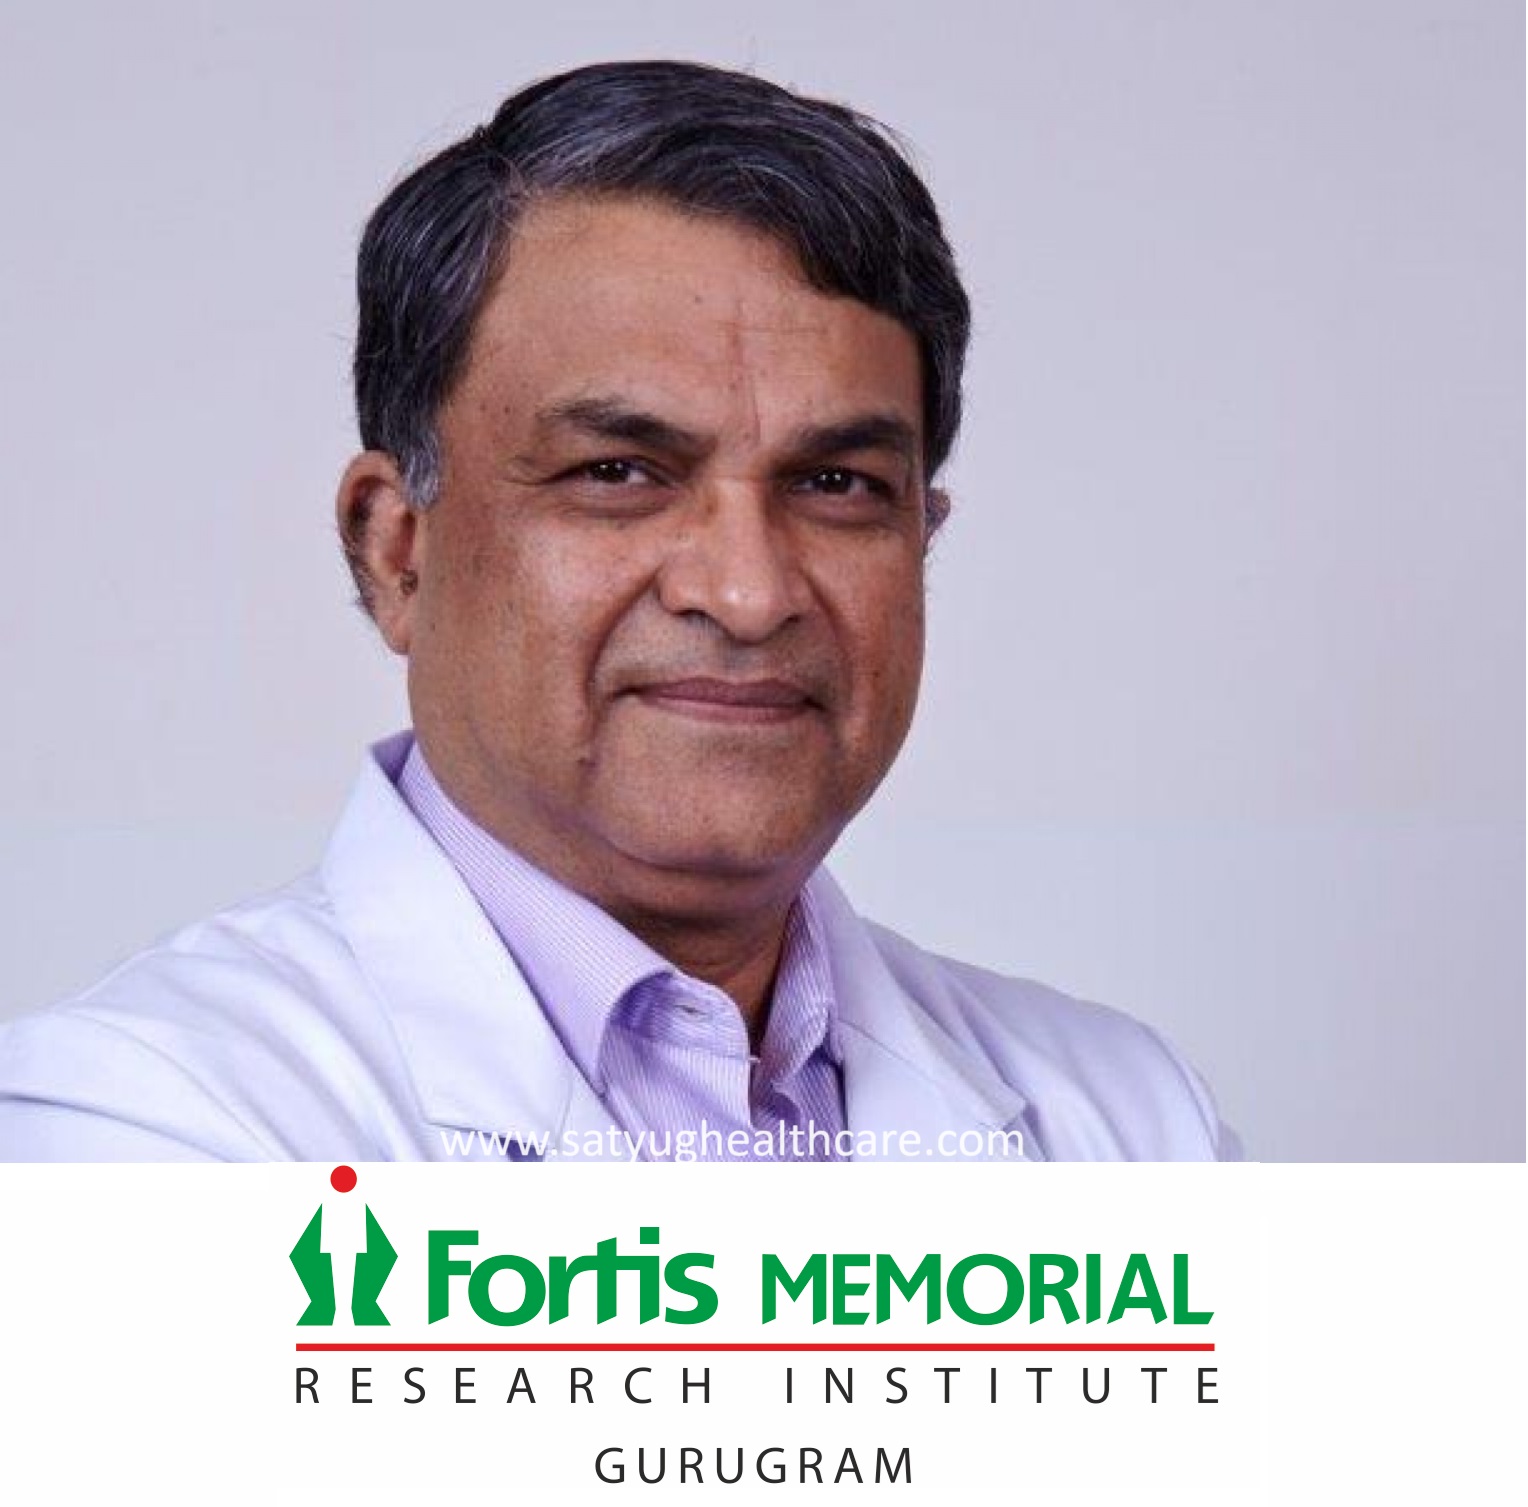 Dr. Ajay Kumar Kriplani is presently working as Principal Director & HOD laparoscopic gastrointestinal, GI Onco, bariatric surgery & Minimally invasive surgery at  Fortis Memorial Research Institute, Gurgaon, India